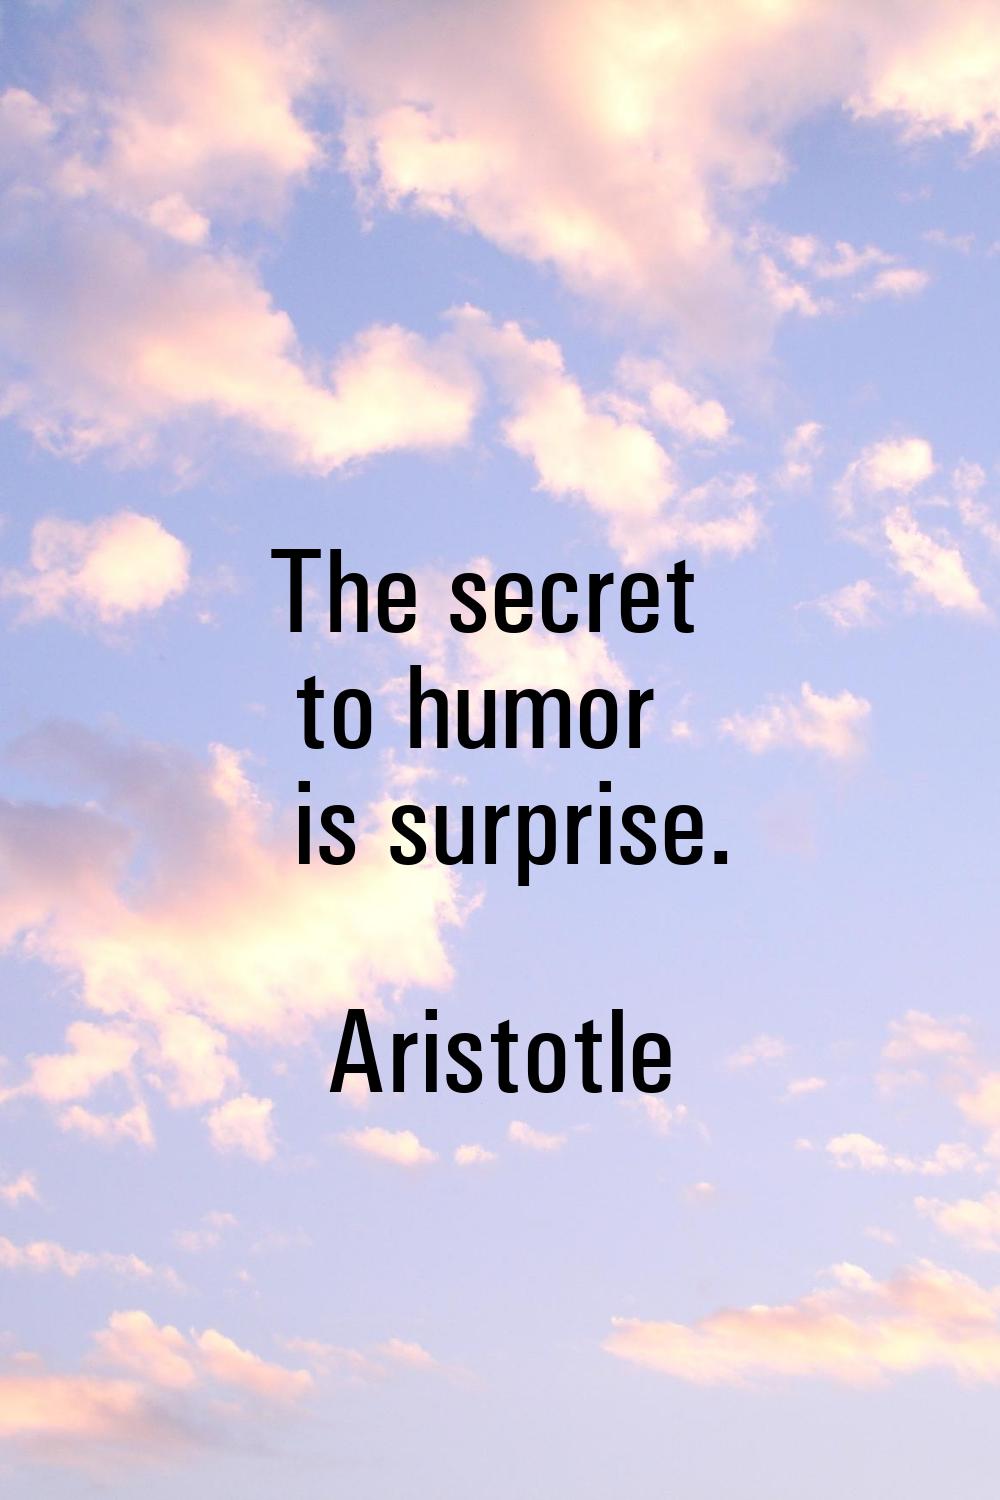 The secret to humor is surprise.